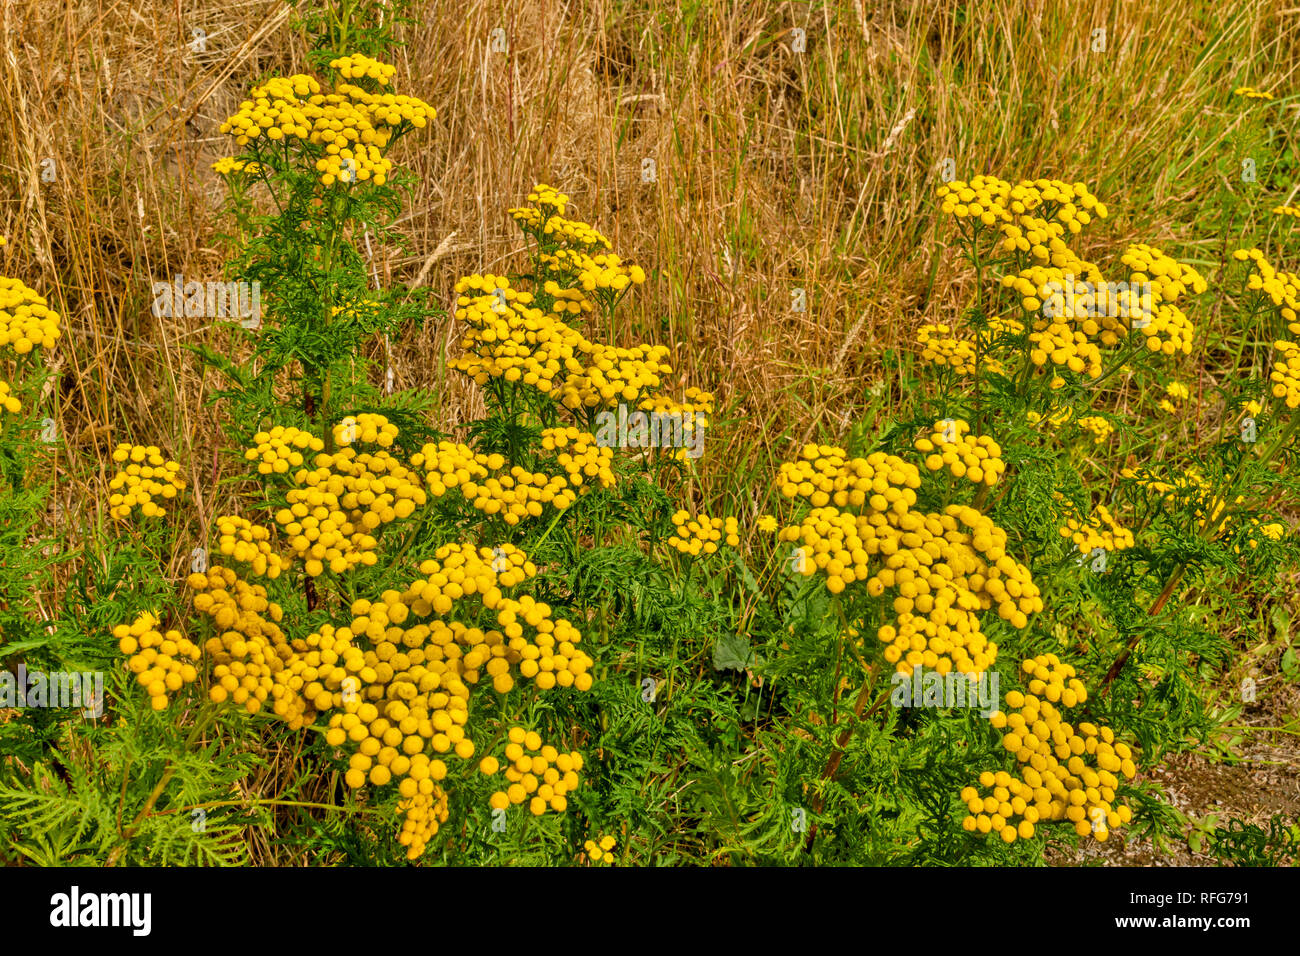 WILD TANSY Tanacetum vulgare PLANTS WITH YELLOW BUTTON FLOWERS IN SUMMER Stock Photo